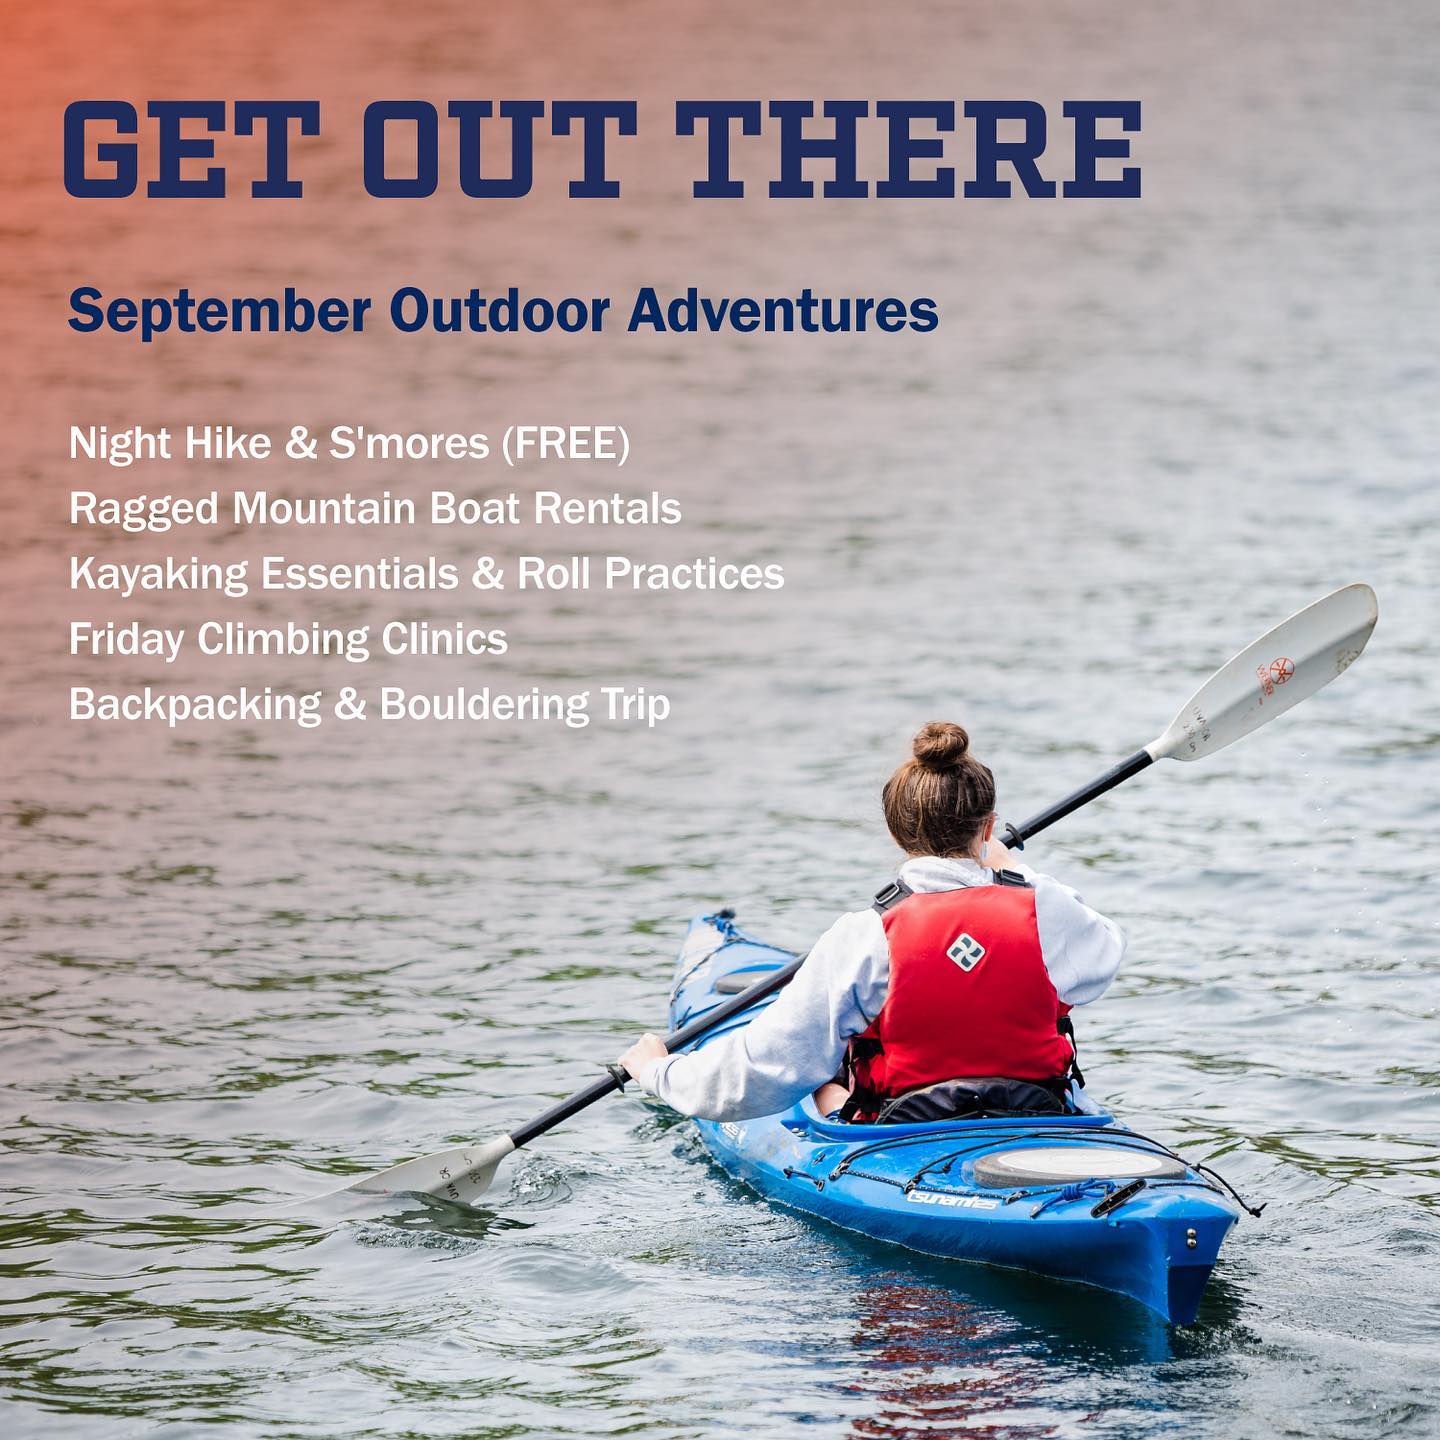 Get Out There! September Outdoor Adventures. Night Hike & Smores (FREE), Ragged Mountain Boat Rentals, Kayaking Essentials & Roll Practices, Friday Climbing Clinics, Backpacking & Bouldering Trip